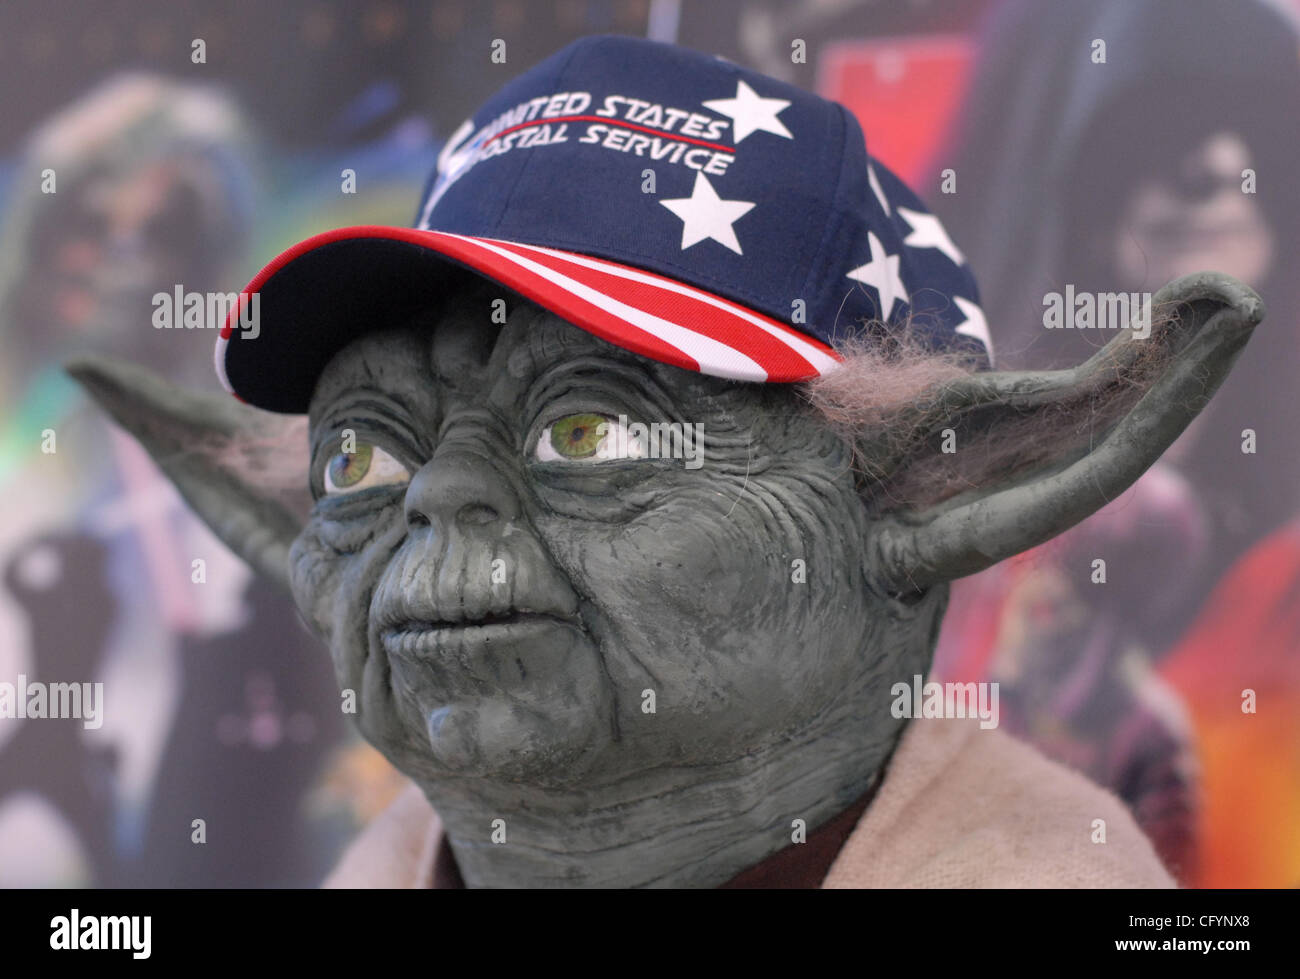 Yoda, along with Darth Vader, and Jabba the Hutt are just a few of the Star Wars personalities spotted at the Concord Main Post Office as they unveil its Star Wars stamps on Friday, May 25, 2007 in Concord, California. (Susan Tripp Pollard/Contra Costa Times) Stock Photo